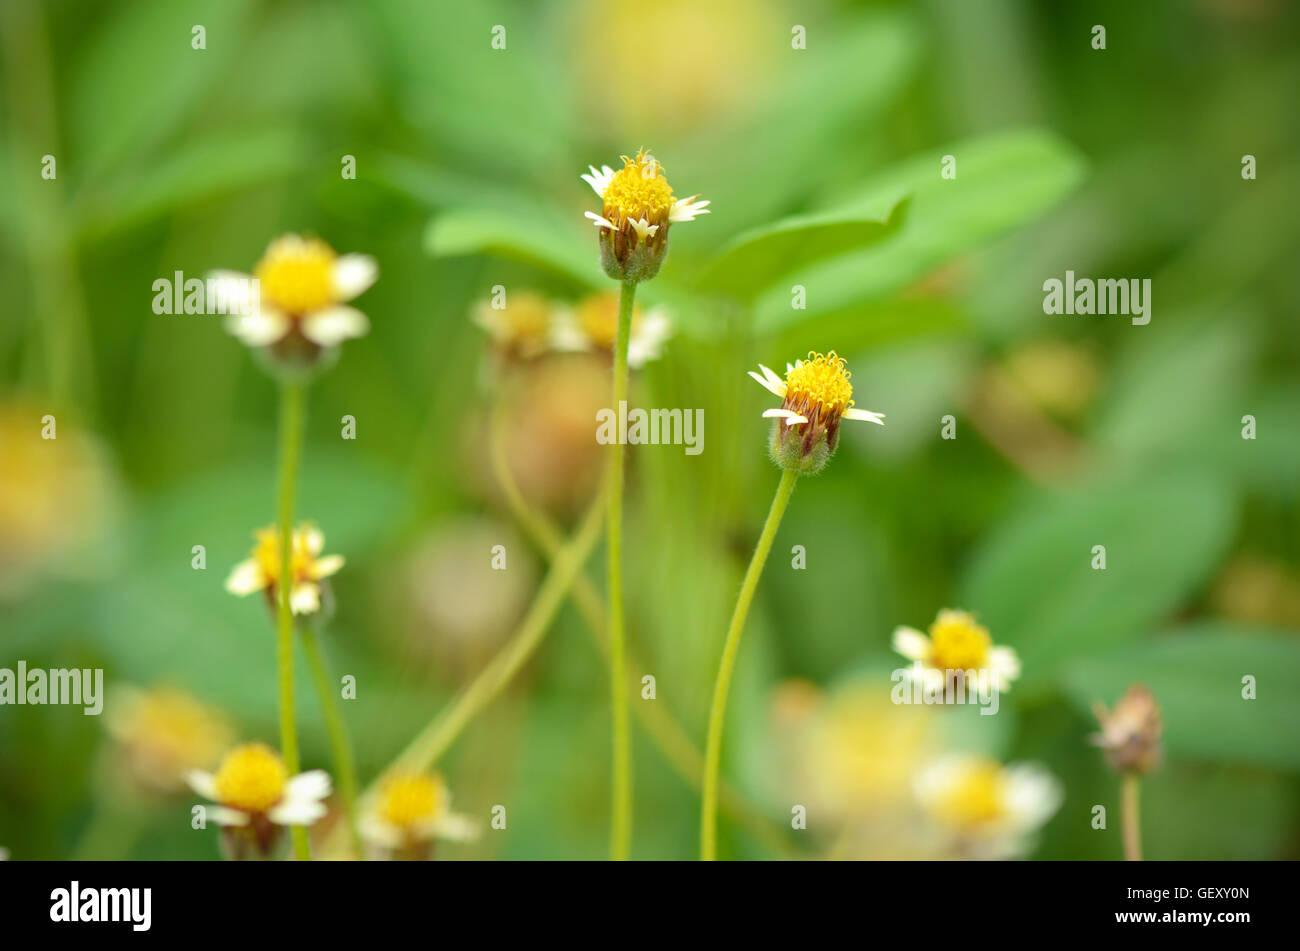 Maxican daisy flowers (Tridax procumbens (L.) L.) on natural green background. Stock Photo